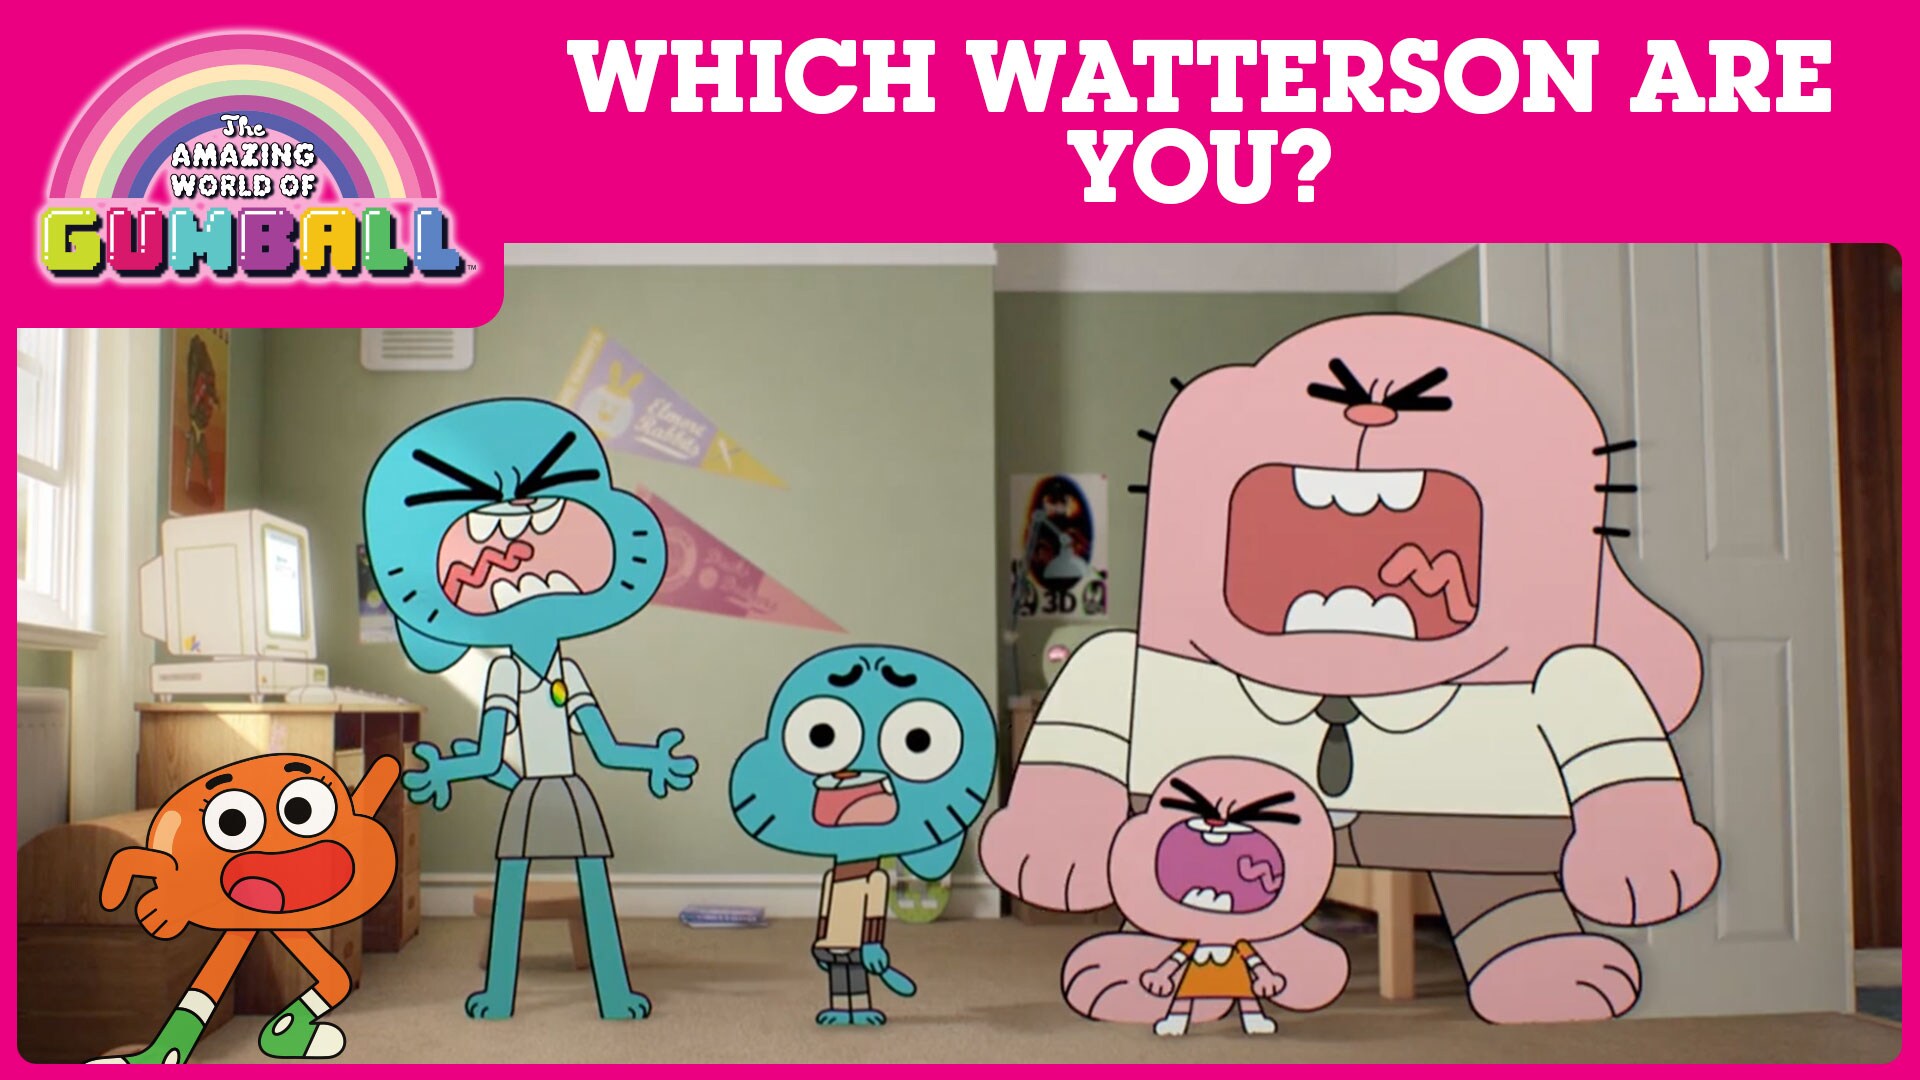 Which the amazing world of gumball character are you